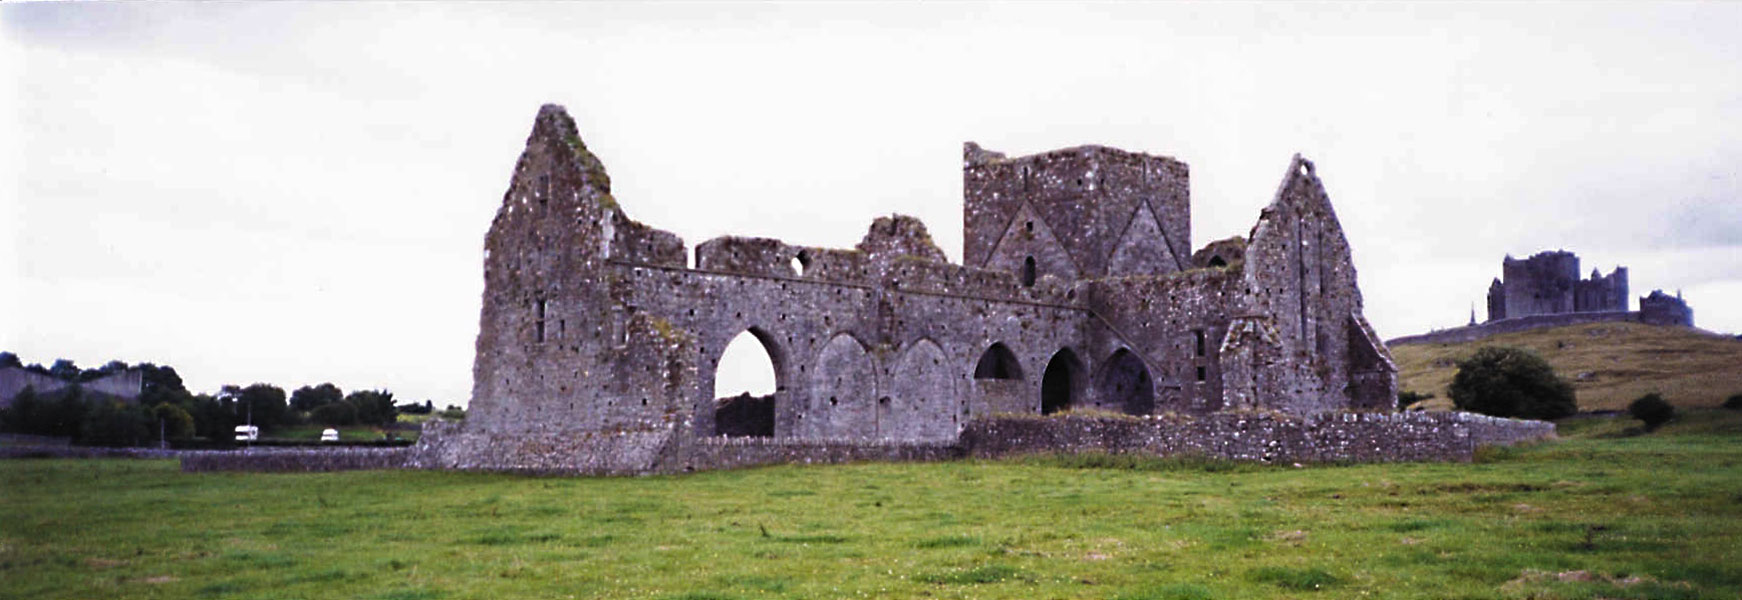 Hore Abbey with the Rock of Cashel in the background, County Tipperary, Ireland 